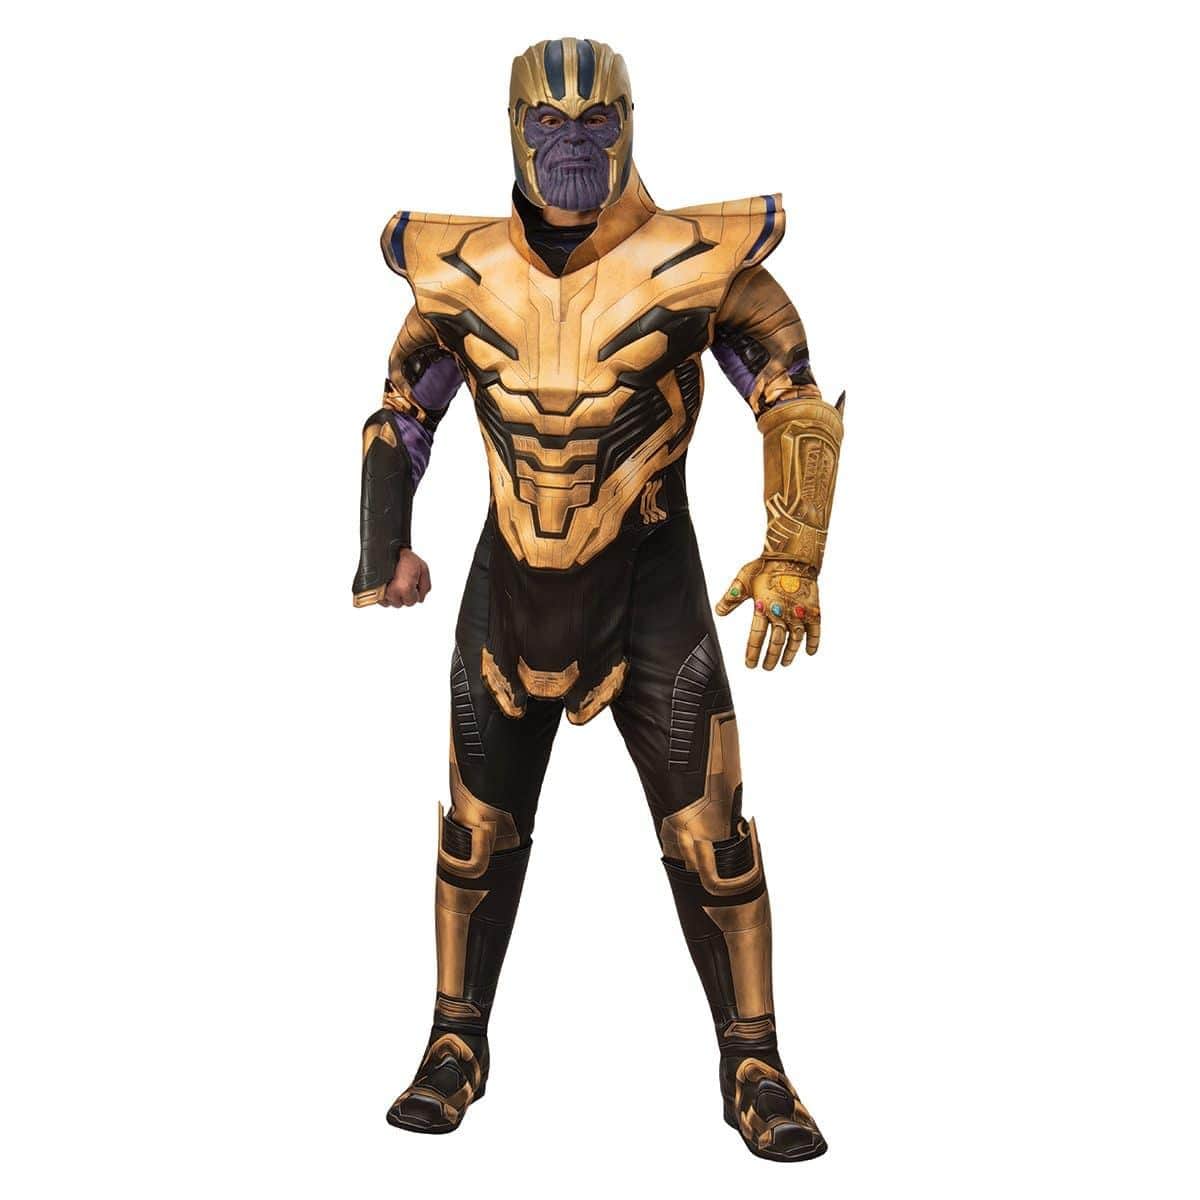 RUBIE S COSTUME CO Costumes Thanos Deluxe Costume for Adults, Avengers 4: Endgame